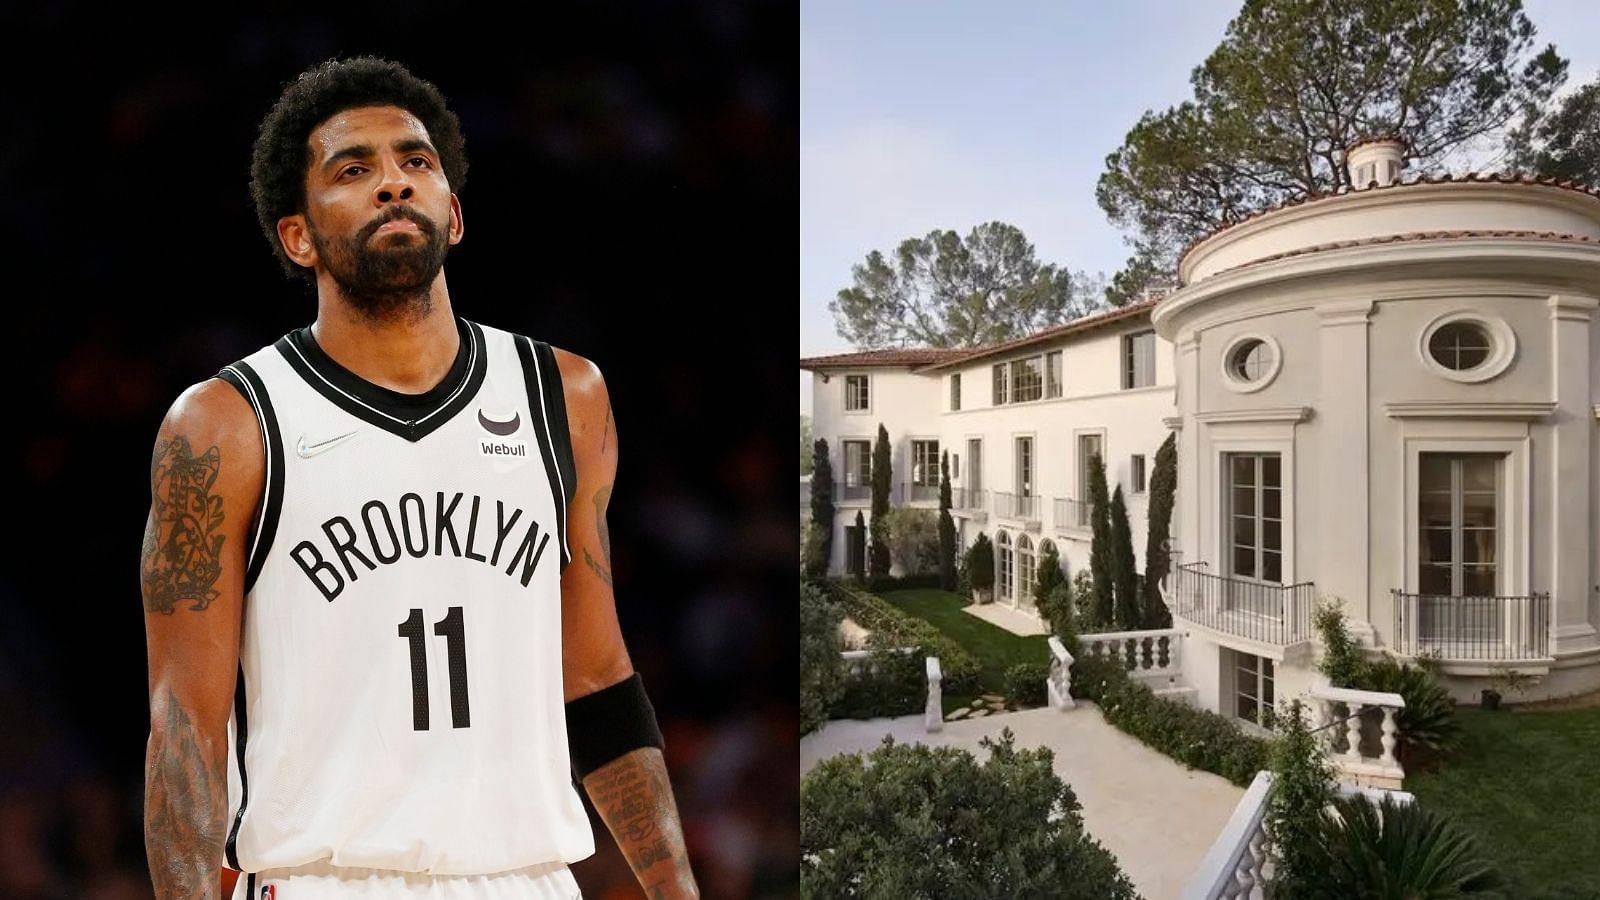 Kyrie Irving has a net worth of $90 million and his new $3.7 million purchase in LA could confirm his move to LeBron James’ Lakers